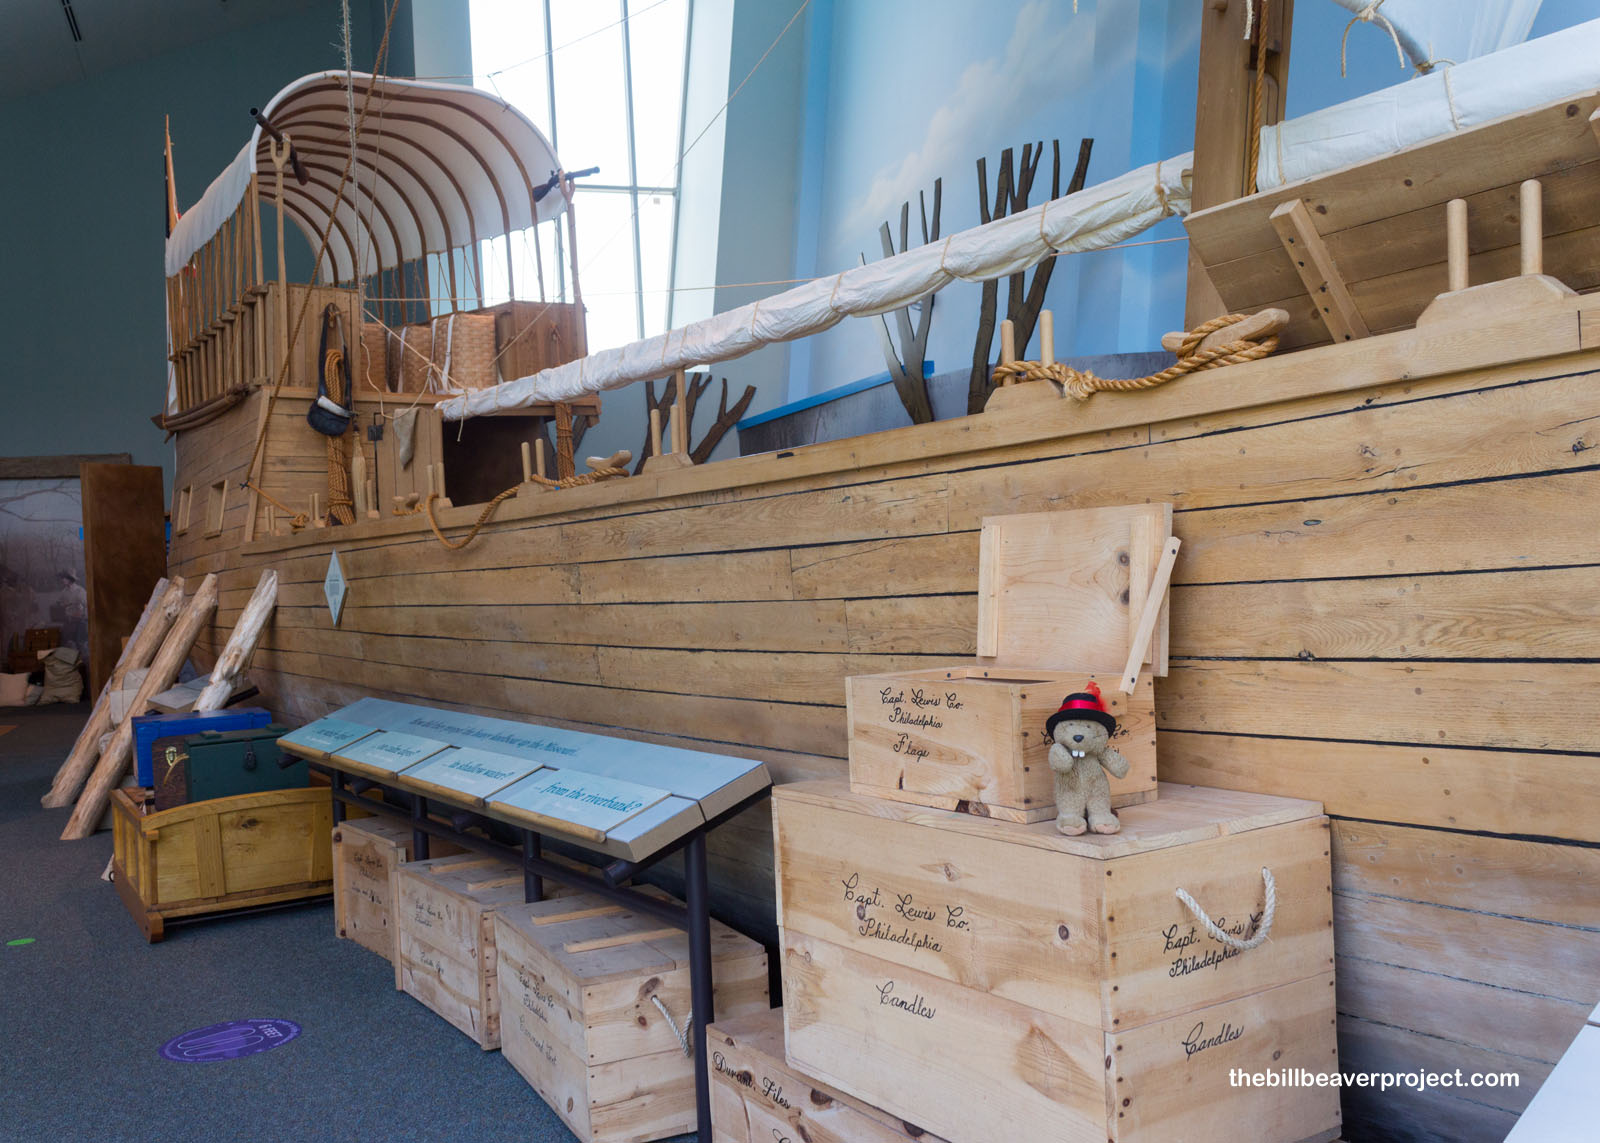 A reconstruction of the mission's barge!